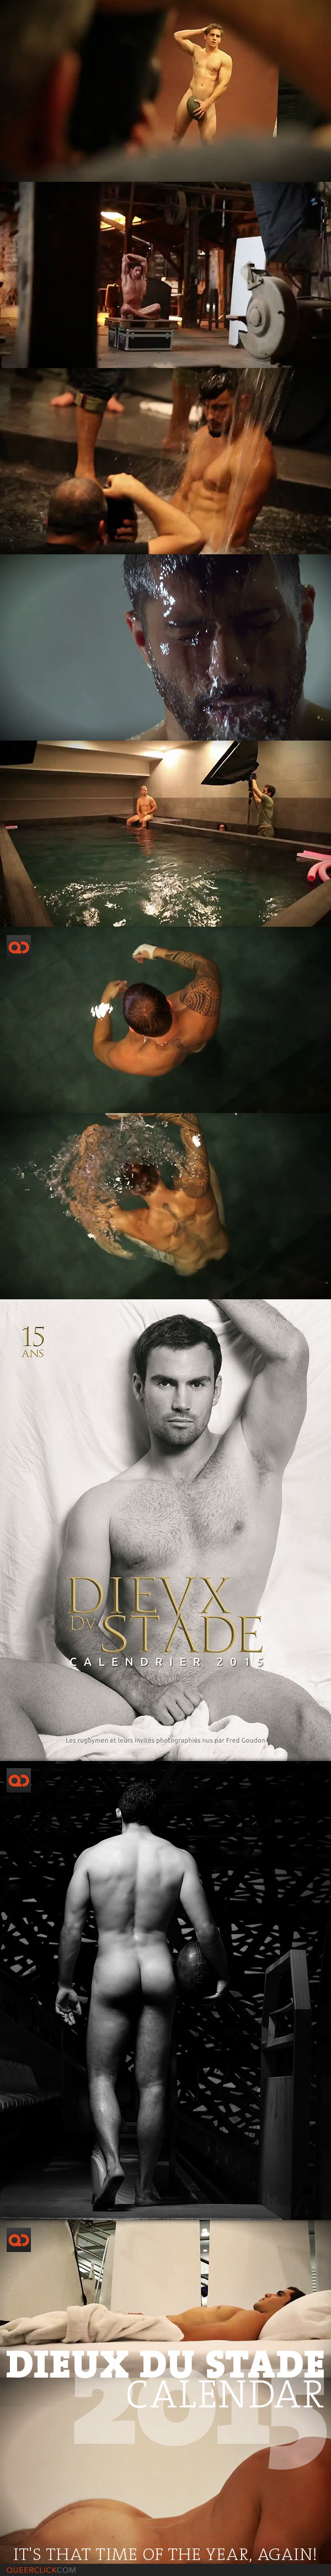 Dieux Du Stade Calendar 2015 - It's That Time Of The Year Again!